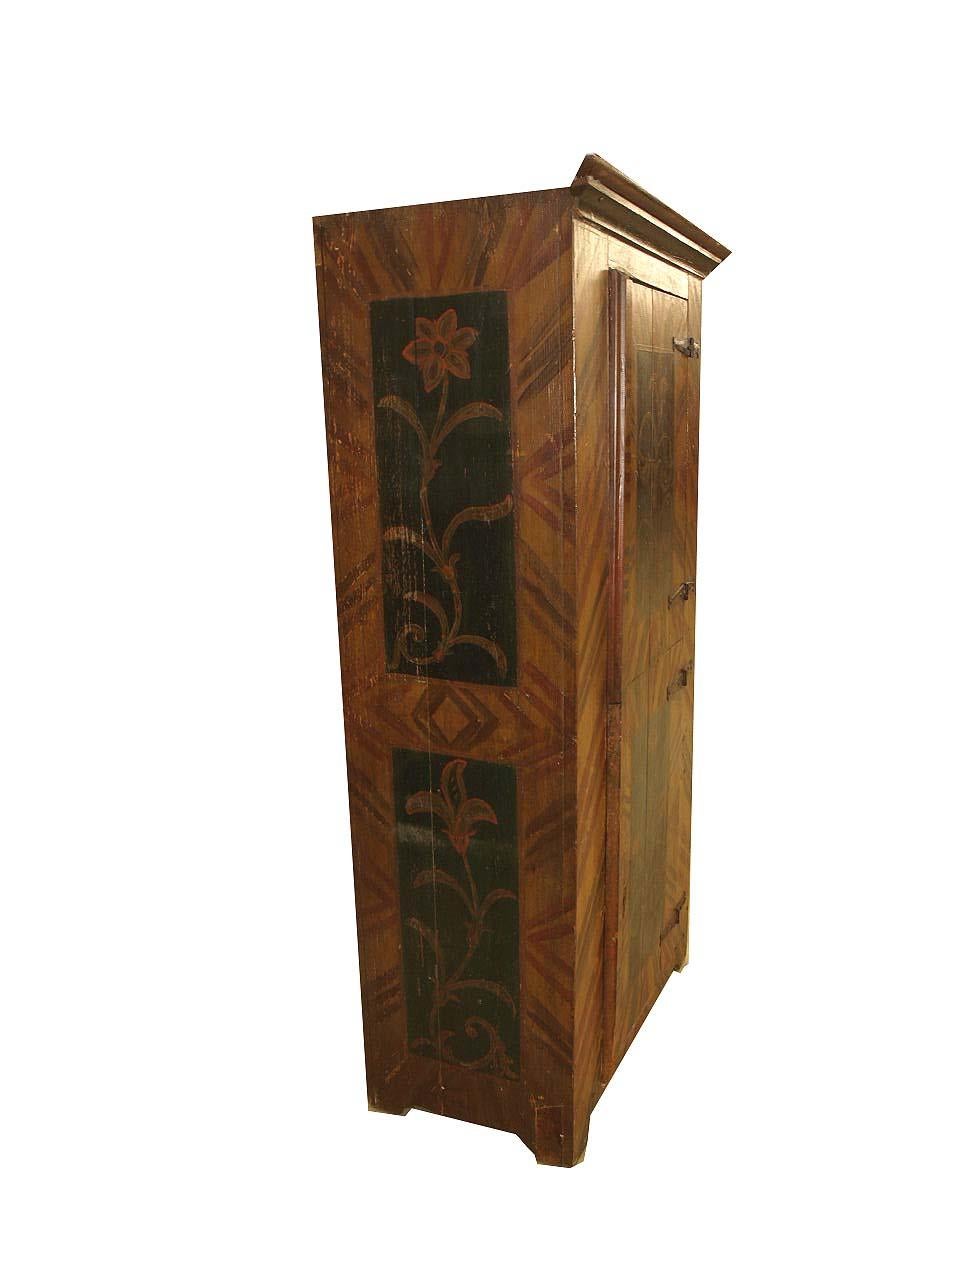 Painted two door cupboard with cove cornice across the front; sides and front painted with stylized floral panels surrounded by diagonal stripes of alternating red and brown on an antique gold color background, top and bottom interiors with shelf.